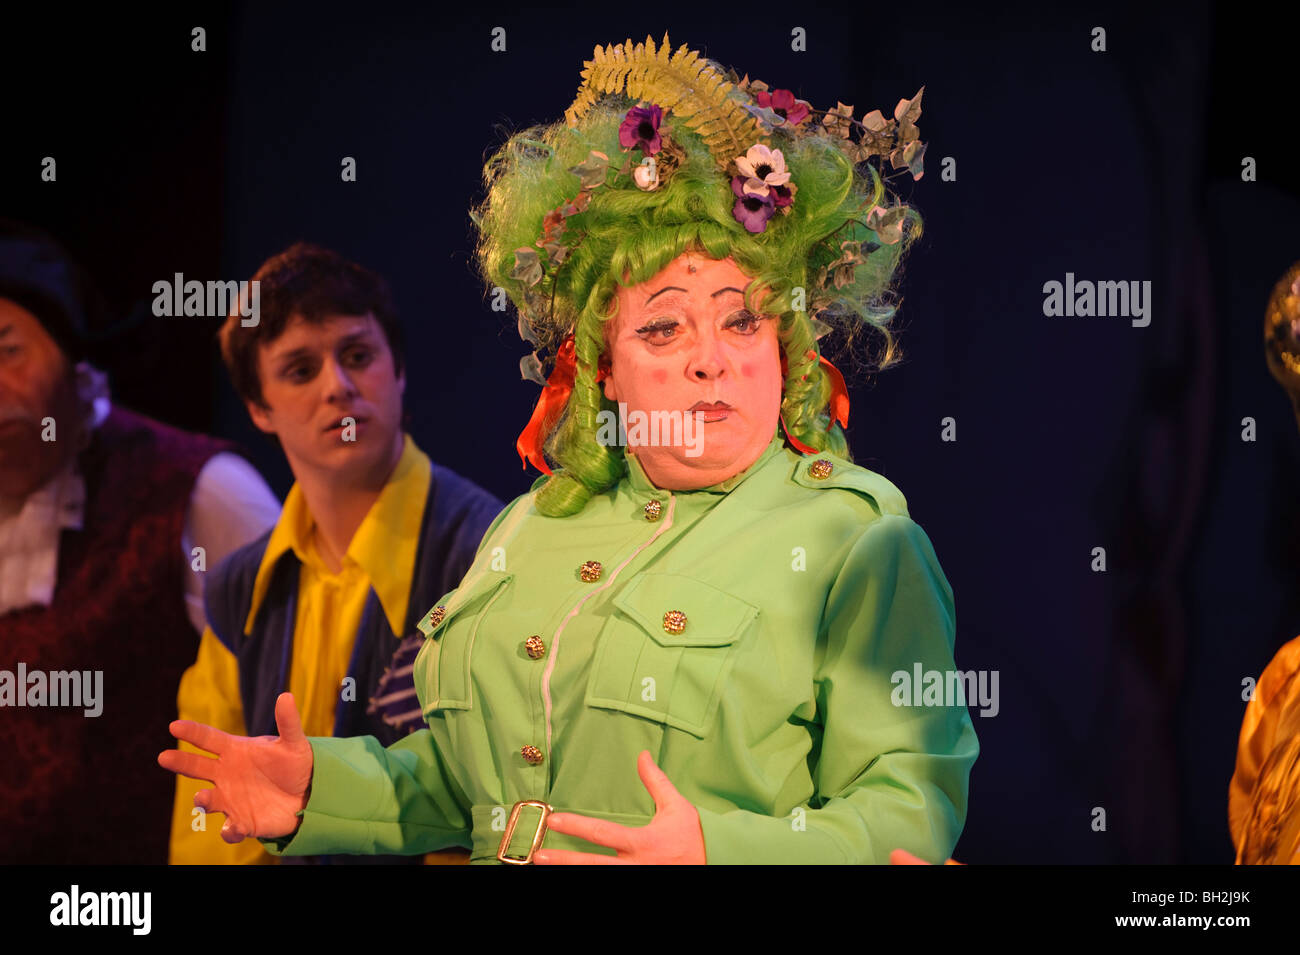 Playing the dame: Actors in an amateur production of Jack and the Beanstalk pantomime, Aberystwyth Arts Centre, Wales UK Stock Photo